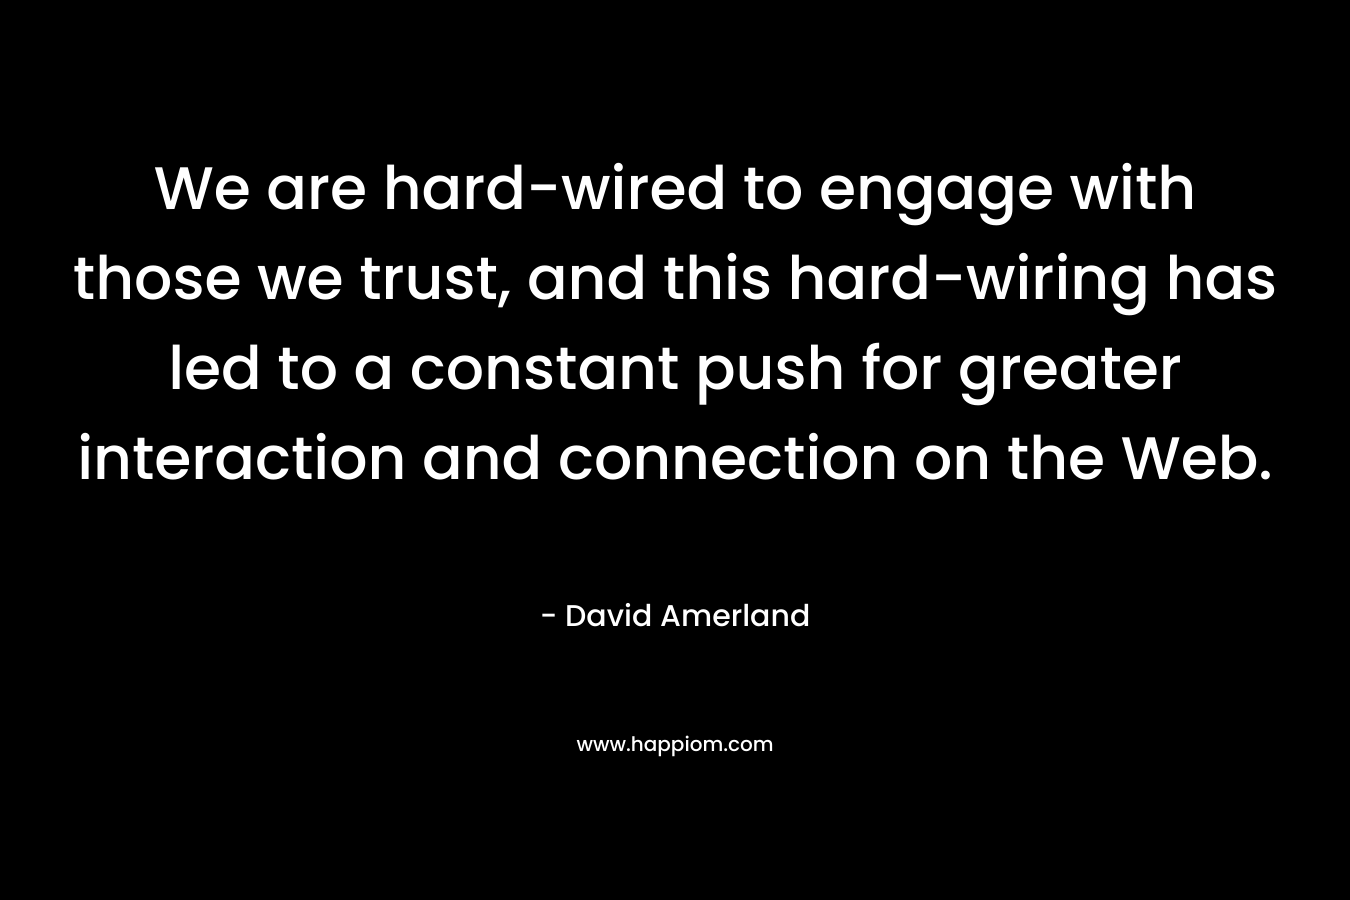 We are hard-wired to engage with those we trust, and this hard-wiring has led to a constant push for greater interaction and connection on the Web.